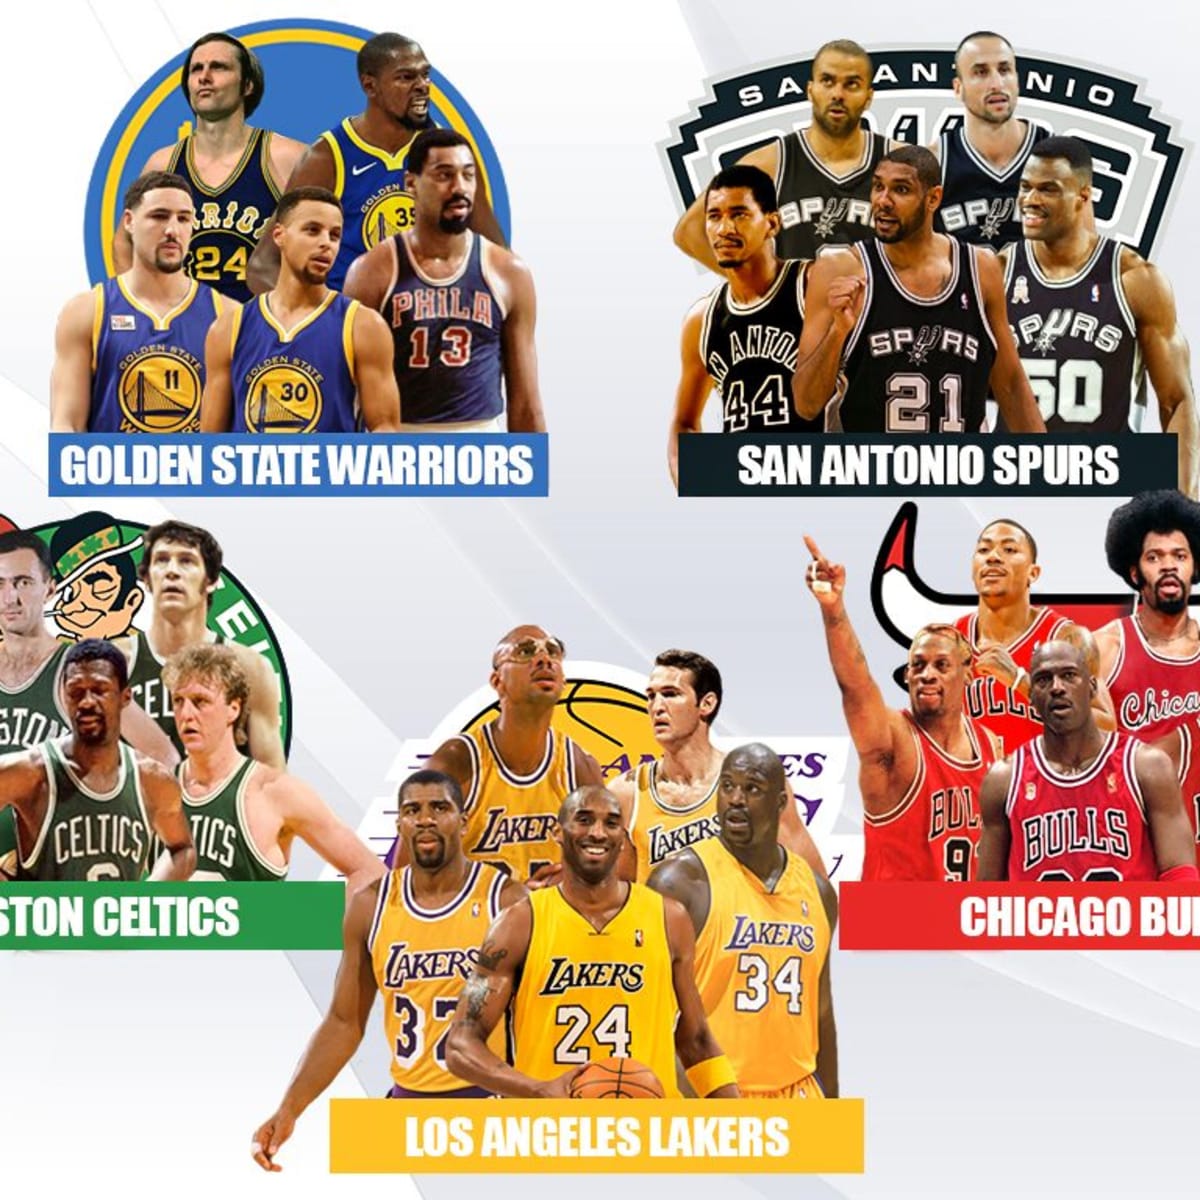 10 greatest teams in SuperSonics history, ranked